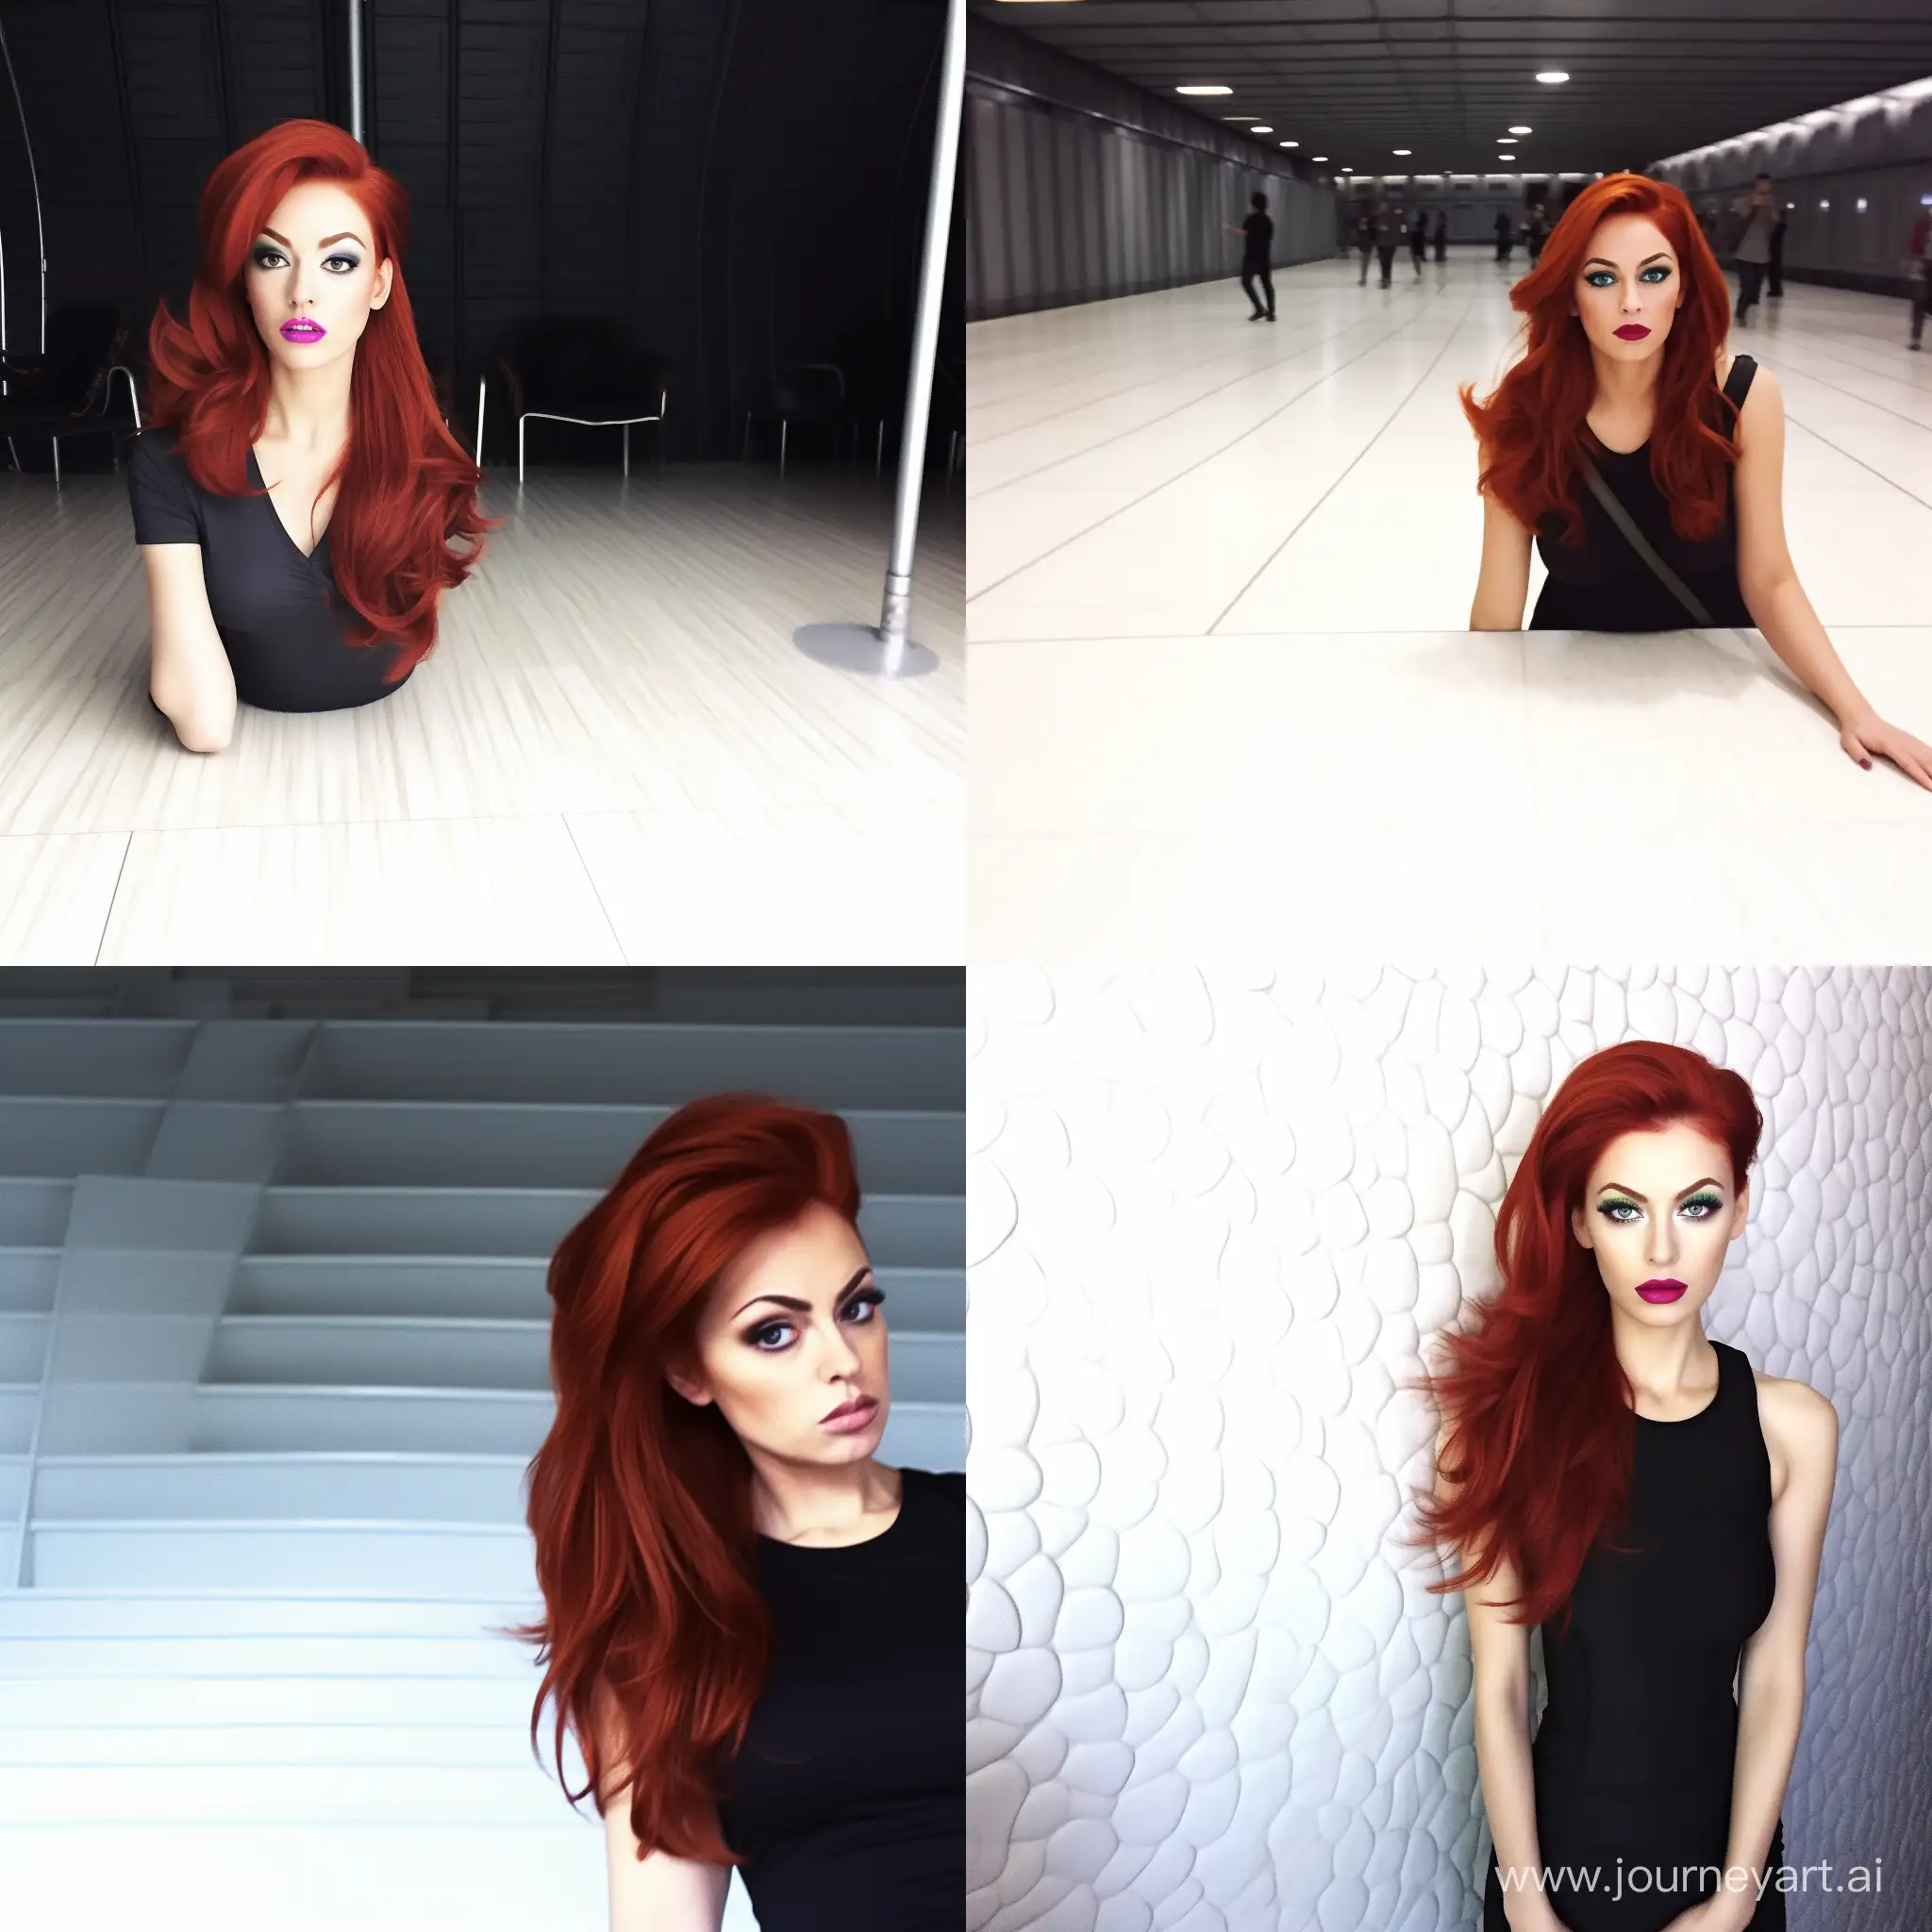 RedHaired-Womans-Interior-Selfie-Candid-Moment-Captured-on-LowQuality-Phone